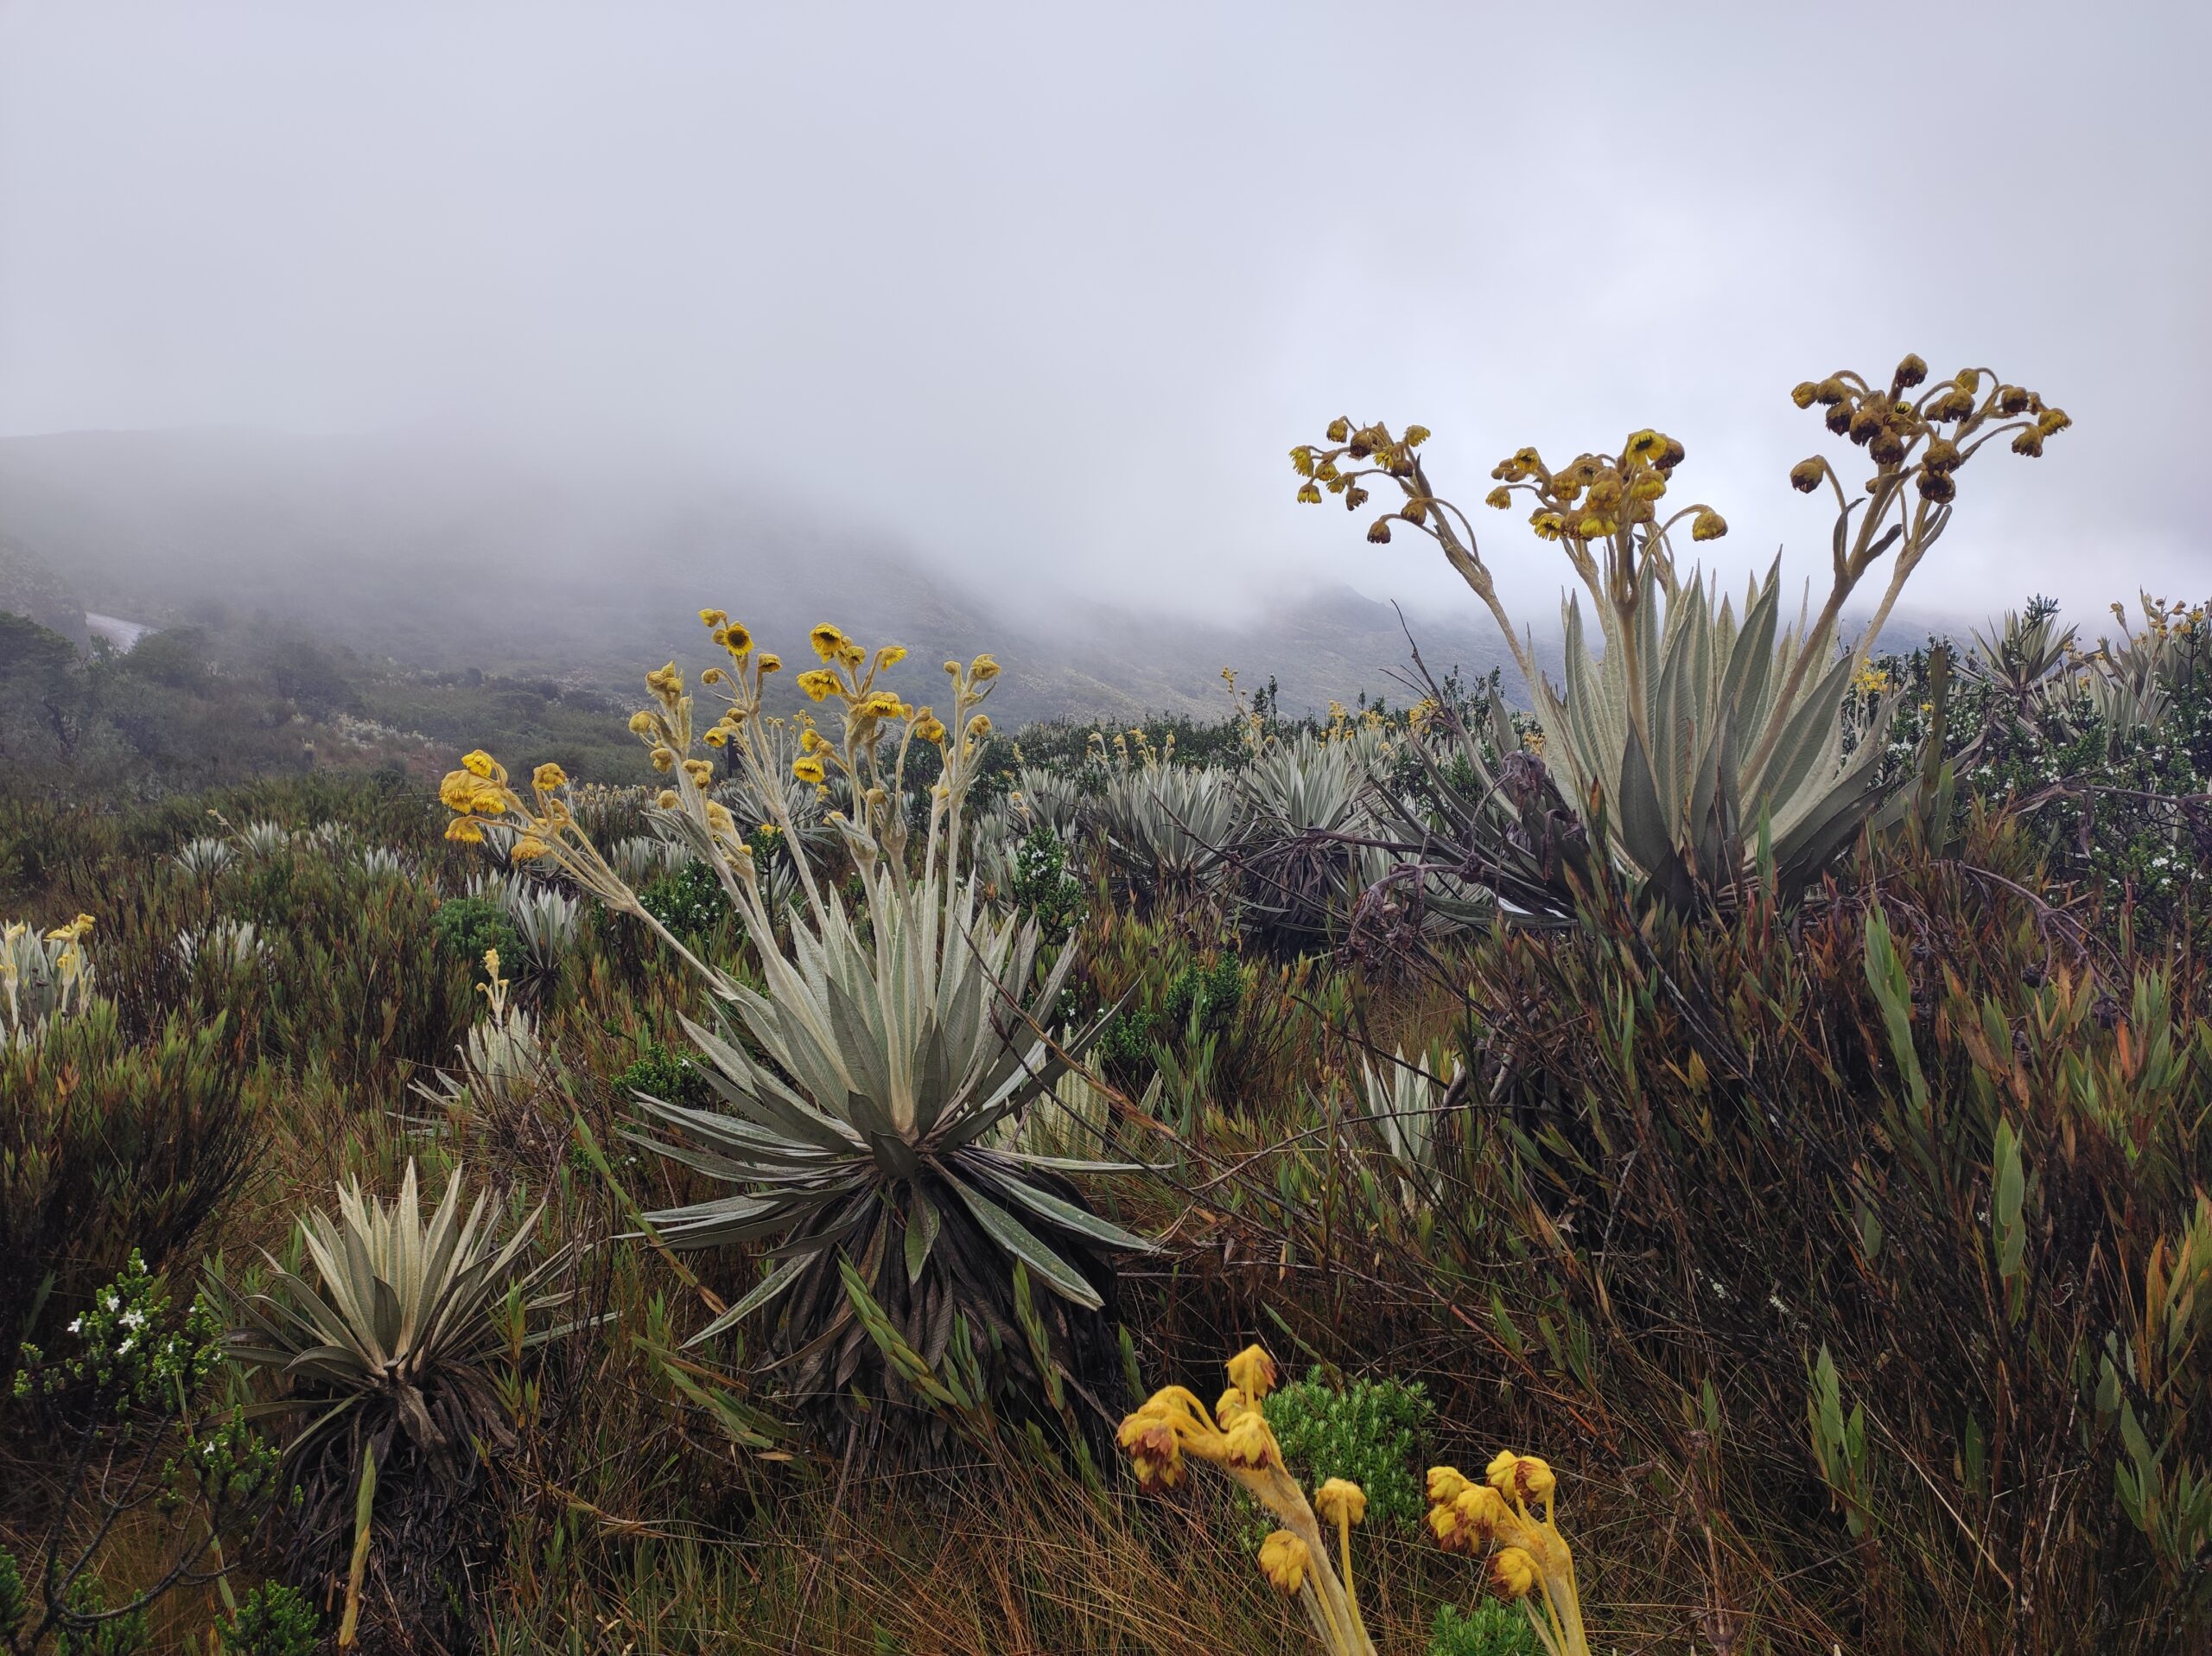 A misty mountainous landscape with various plants, including yellow flowers and spiky gray-green foliage, set in tall grasses is one of the enchanting sights you might encounter on tours in Bogotá.